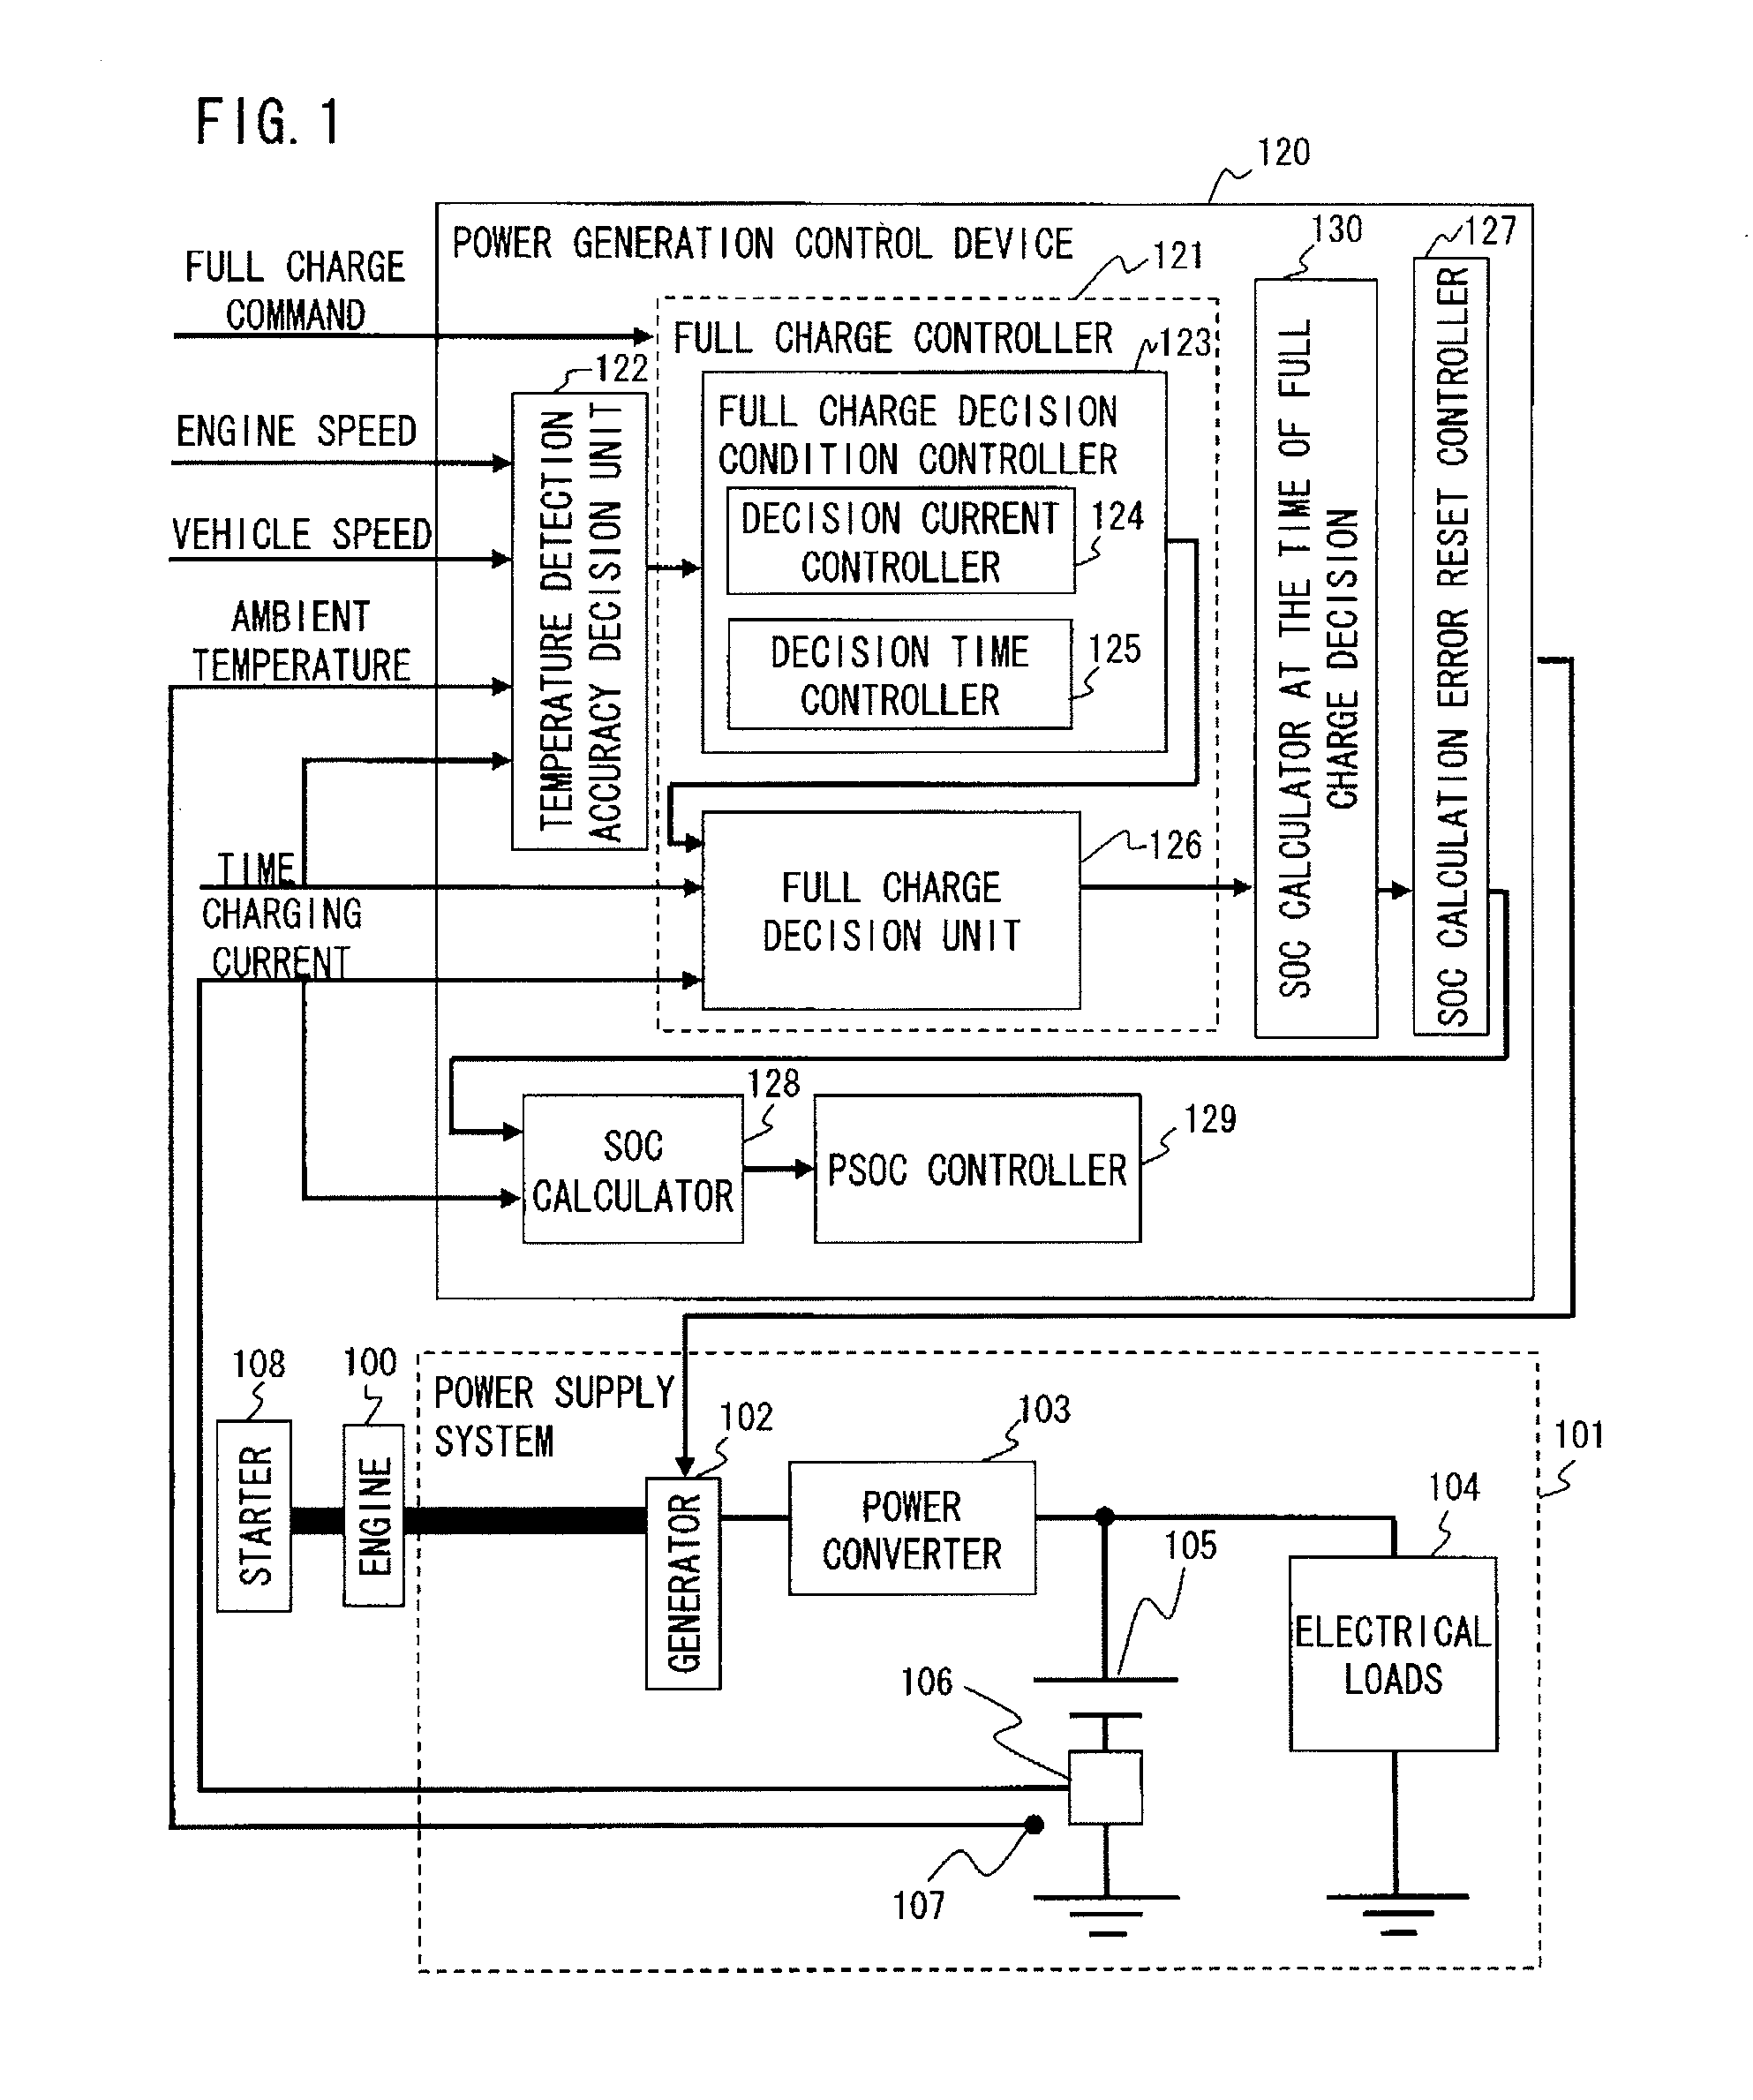 Full charge control apparatus for onboard battery